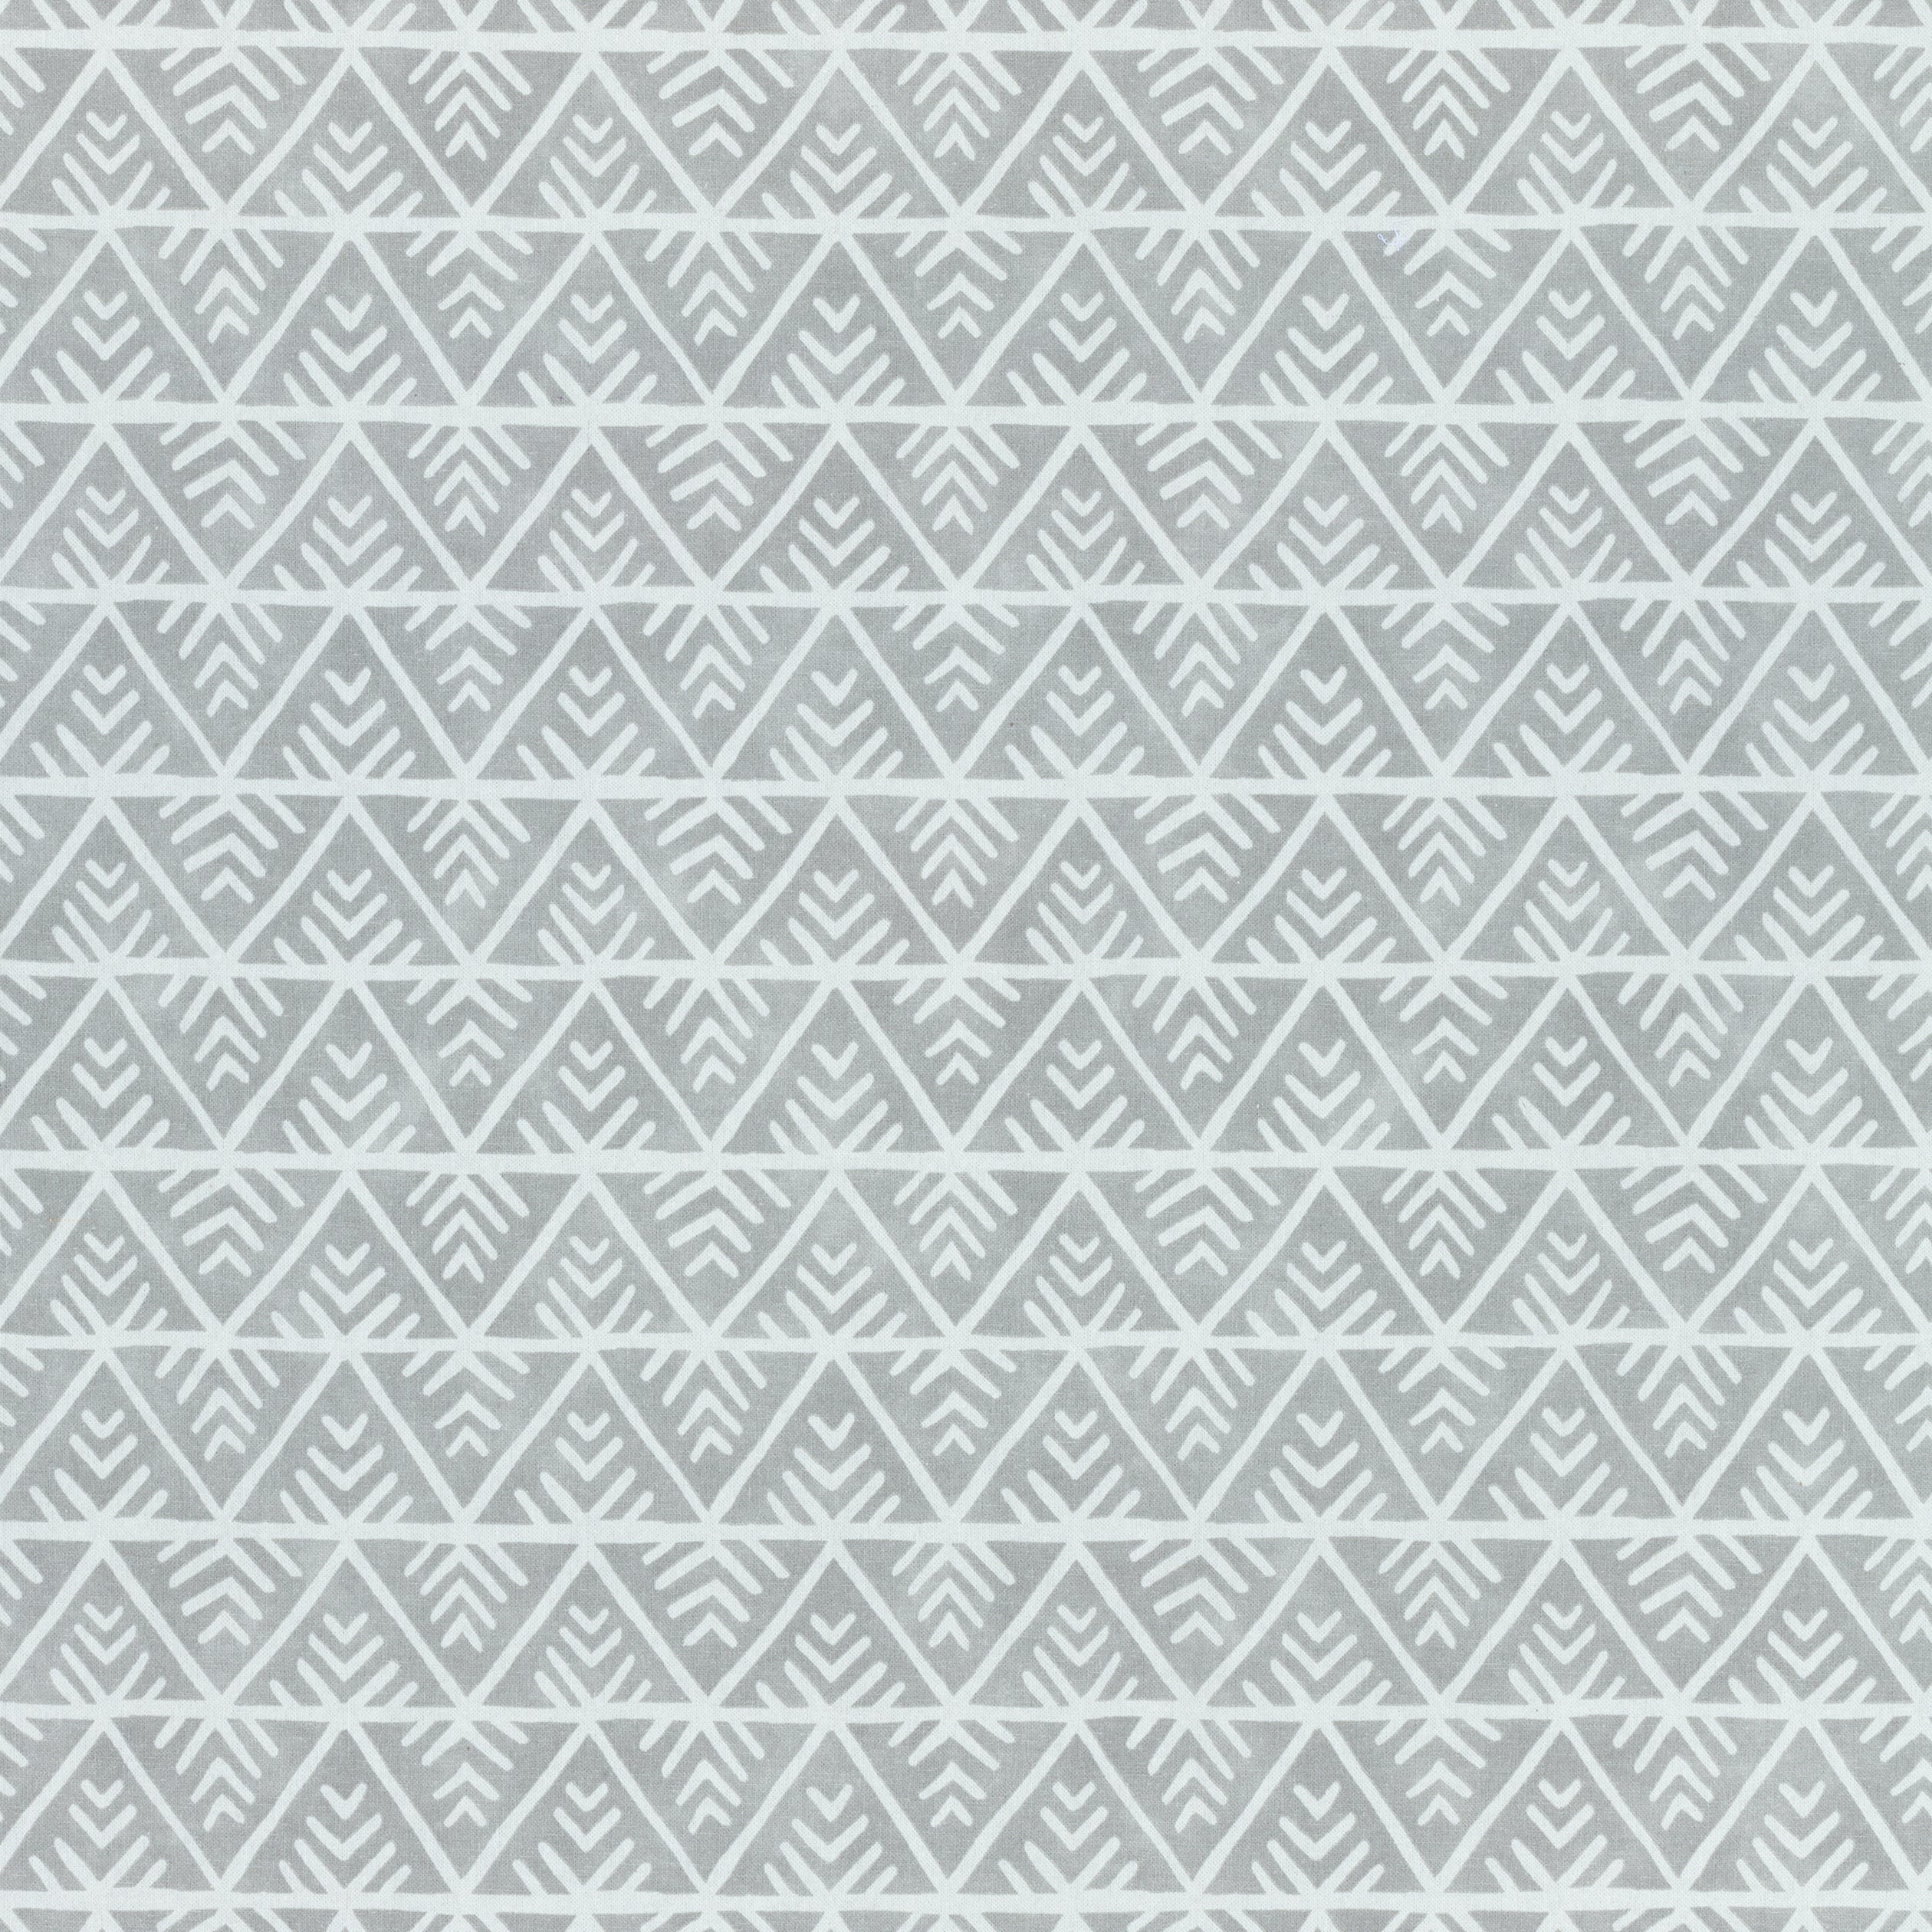 Jules fabric in grey on white color - pattern number AF78702 - by Anna French in the Palampore collection